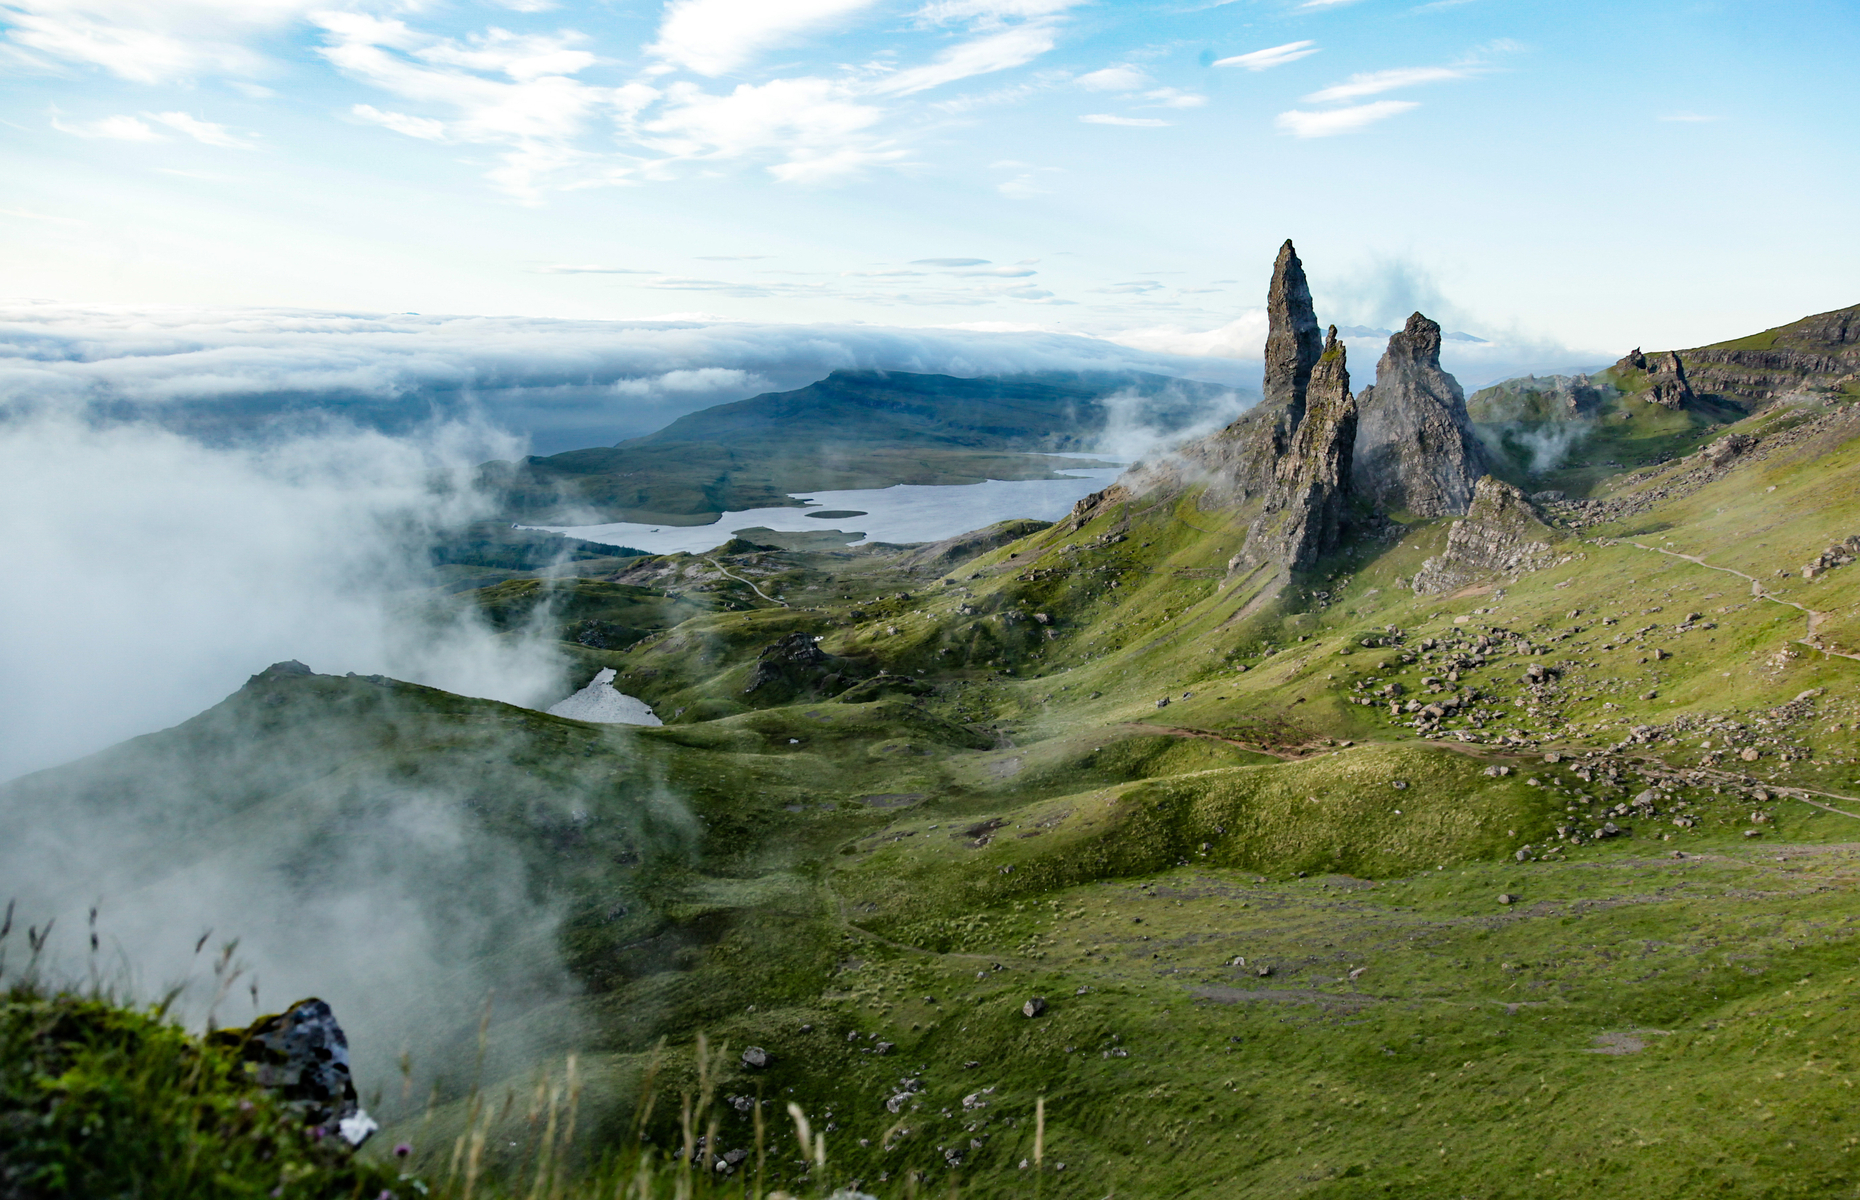 Scotland has no shortage of impressive hiking spots, and the <a href="https://www.lonelyplanet.com/scotland/trotternish/attractions/quiraing/a/poi-sig/1199384/1314765" rel="noreferrer noopener">Quiraing</a> is probably its most magnificent. Located on the Isle of Skye’s Trotternish Peninsula, the site provides visitors with access to the <a href="https://www.isleofskye.com/skye-guide/top-ten-skye-walks/old-man-of-storr" rel="noreferrer noopener">Old Man of Storr</a>, a mythical rock formation adding a bit drama to the surroundings.